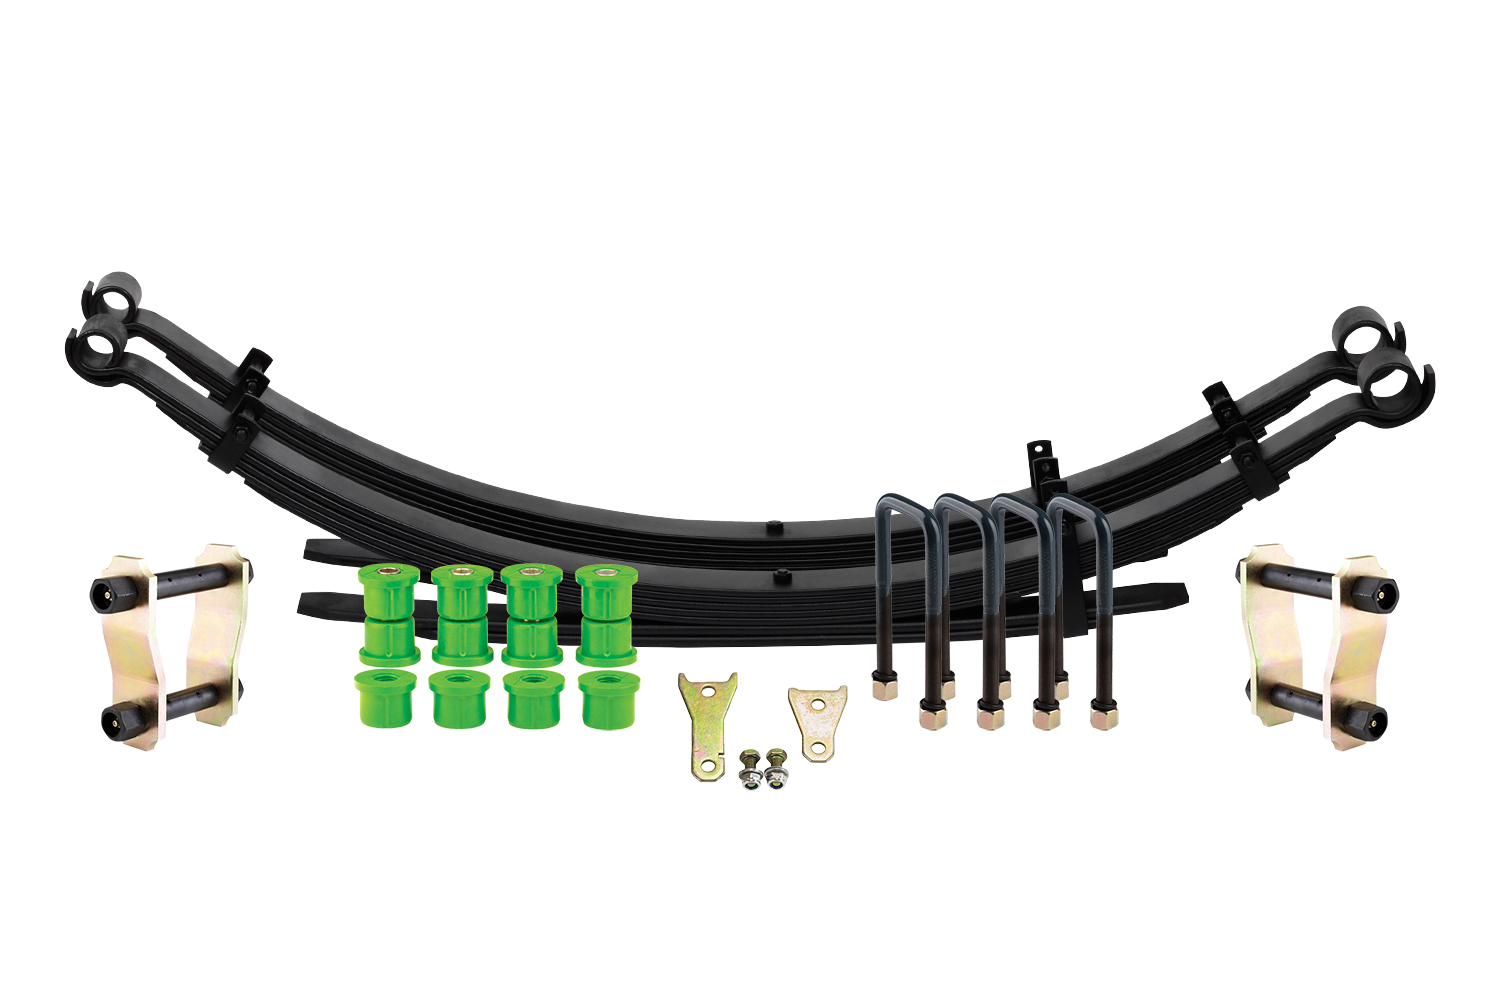 Rear Leaf Springs Kit Suited for Toyota Tundra 2007+ - Constant Load (440-880LBS)